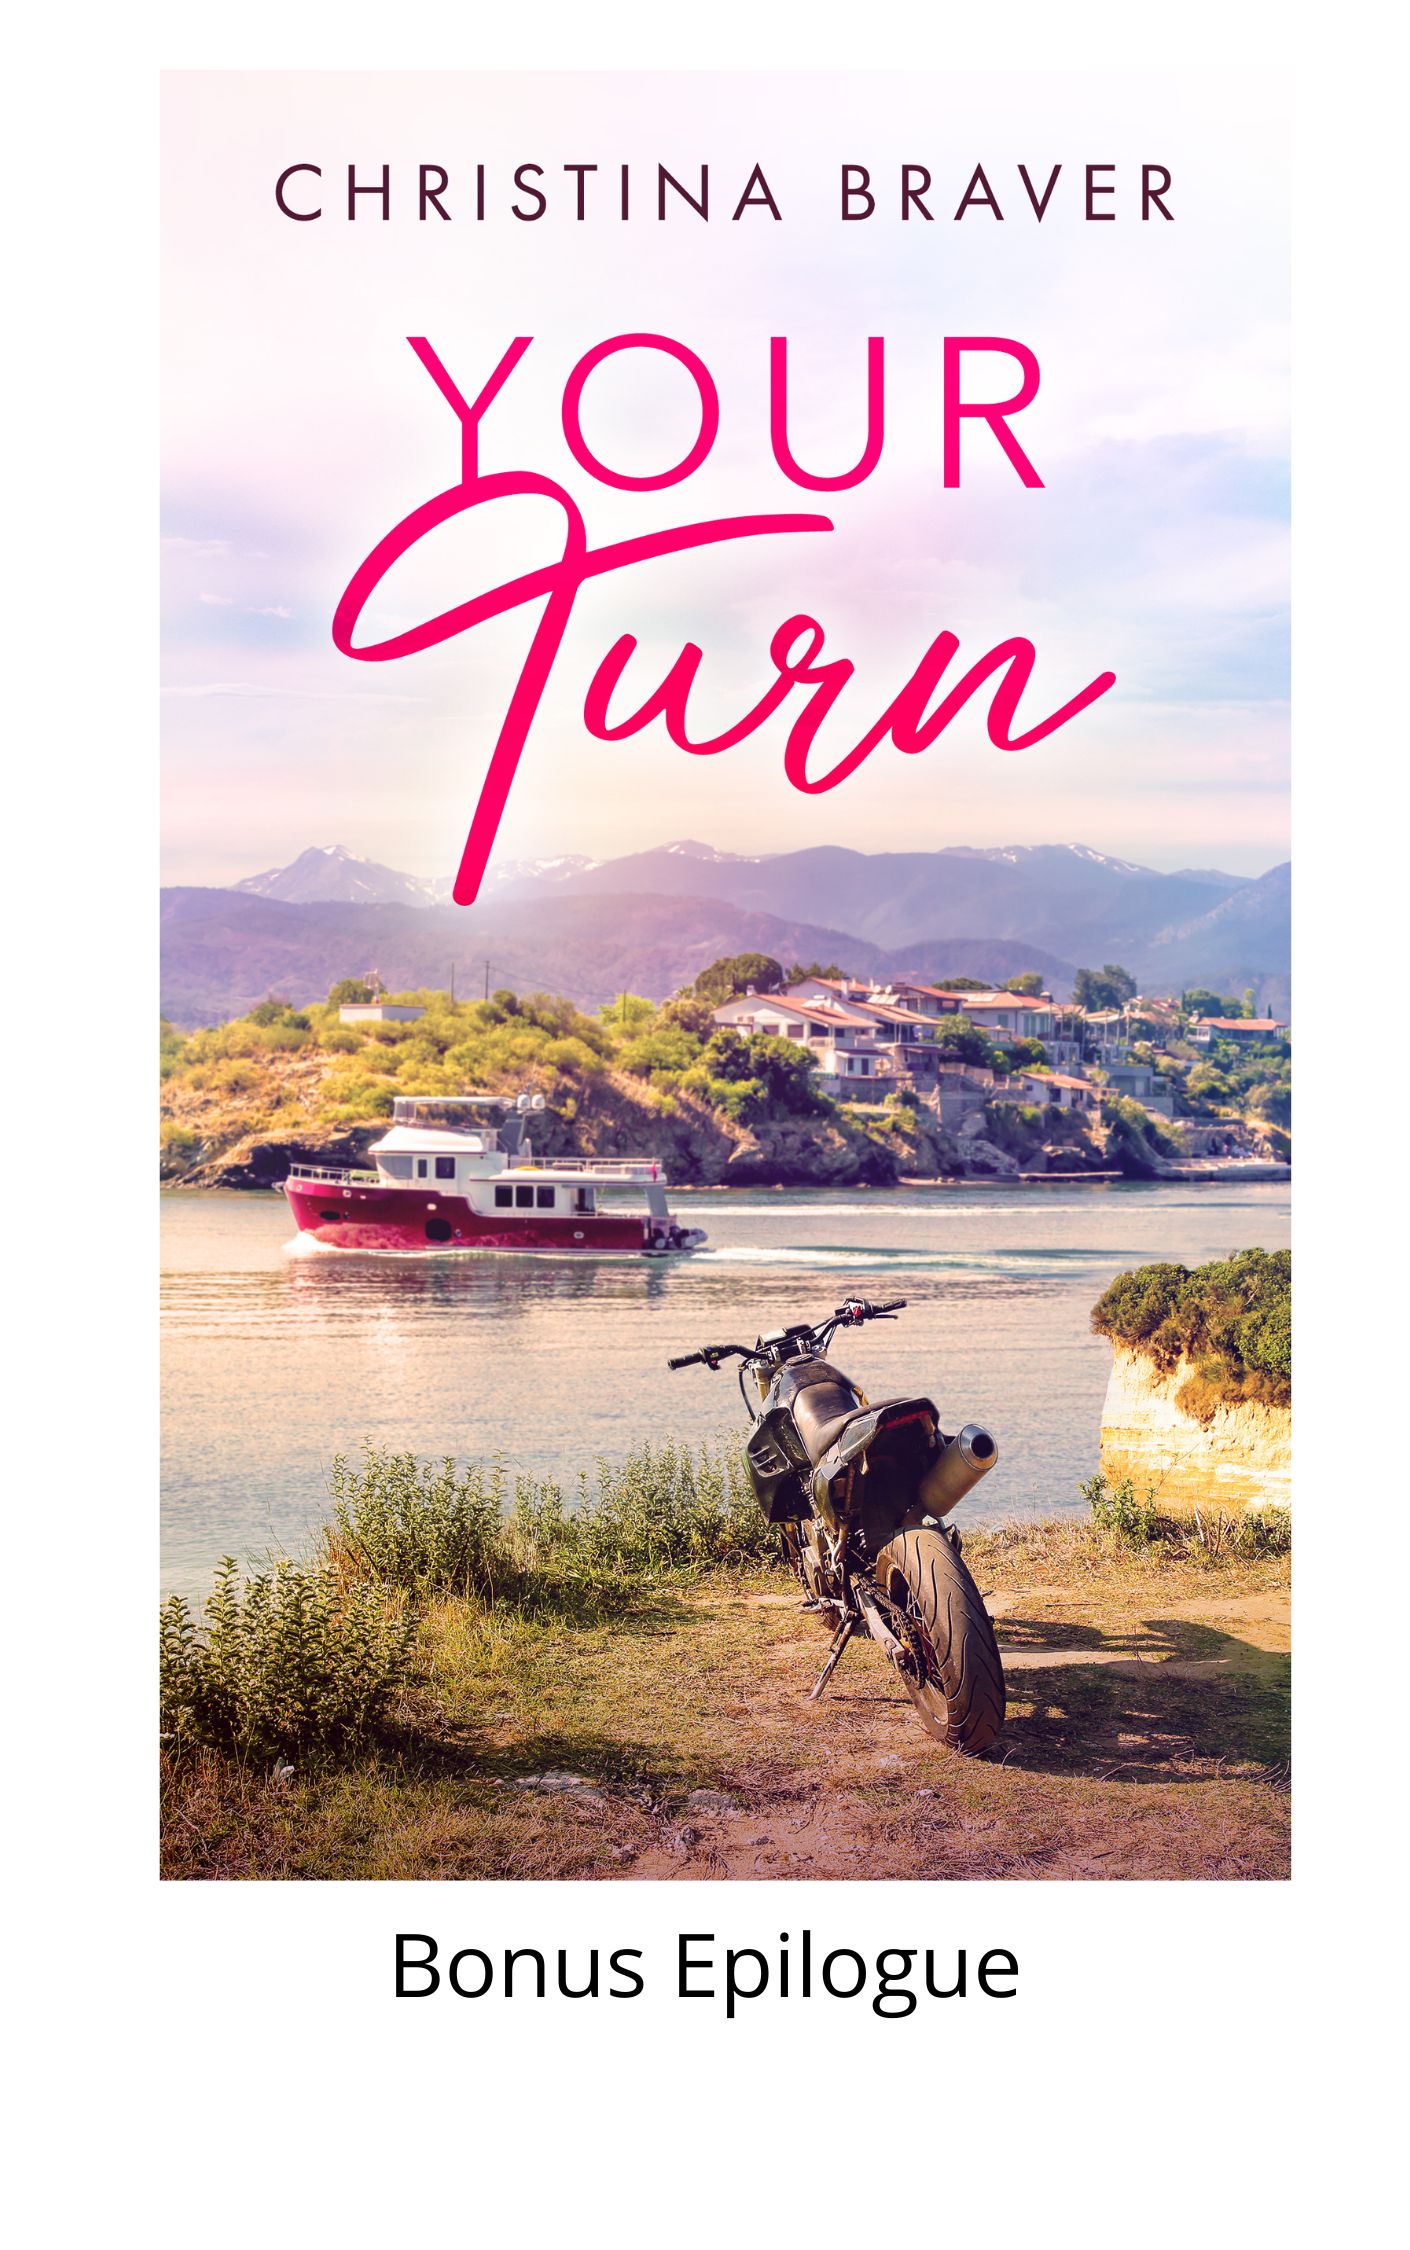 Your Turn book cover